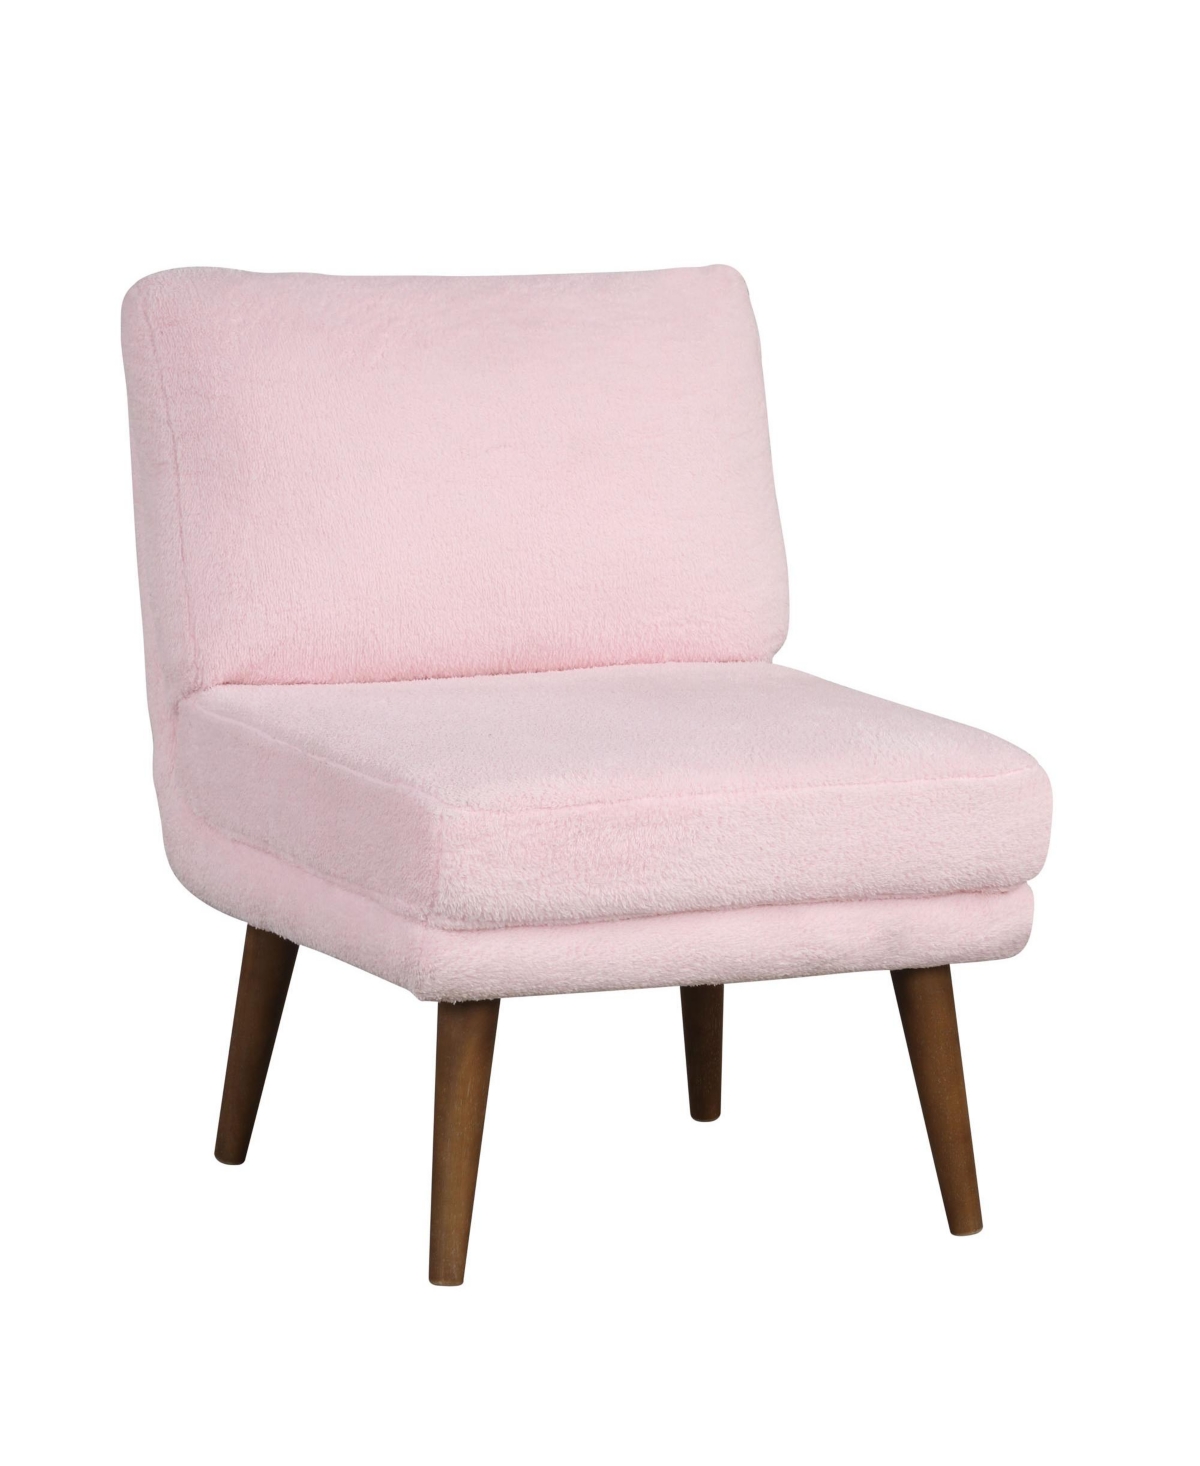 Lifestyle Solutions 31.9" Wood, Steel, Foam And Polyester Darcy Armless Accent Chair In Pink